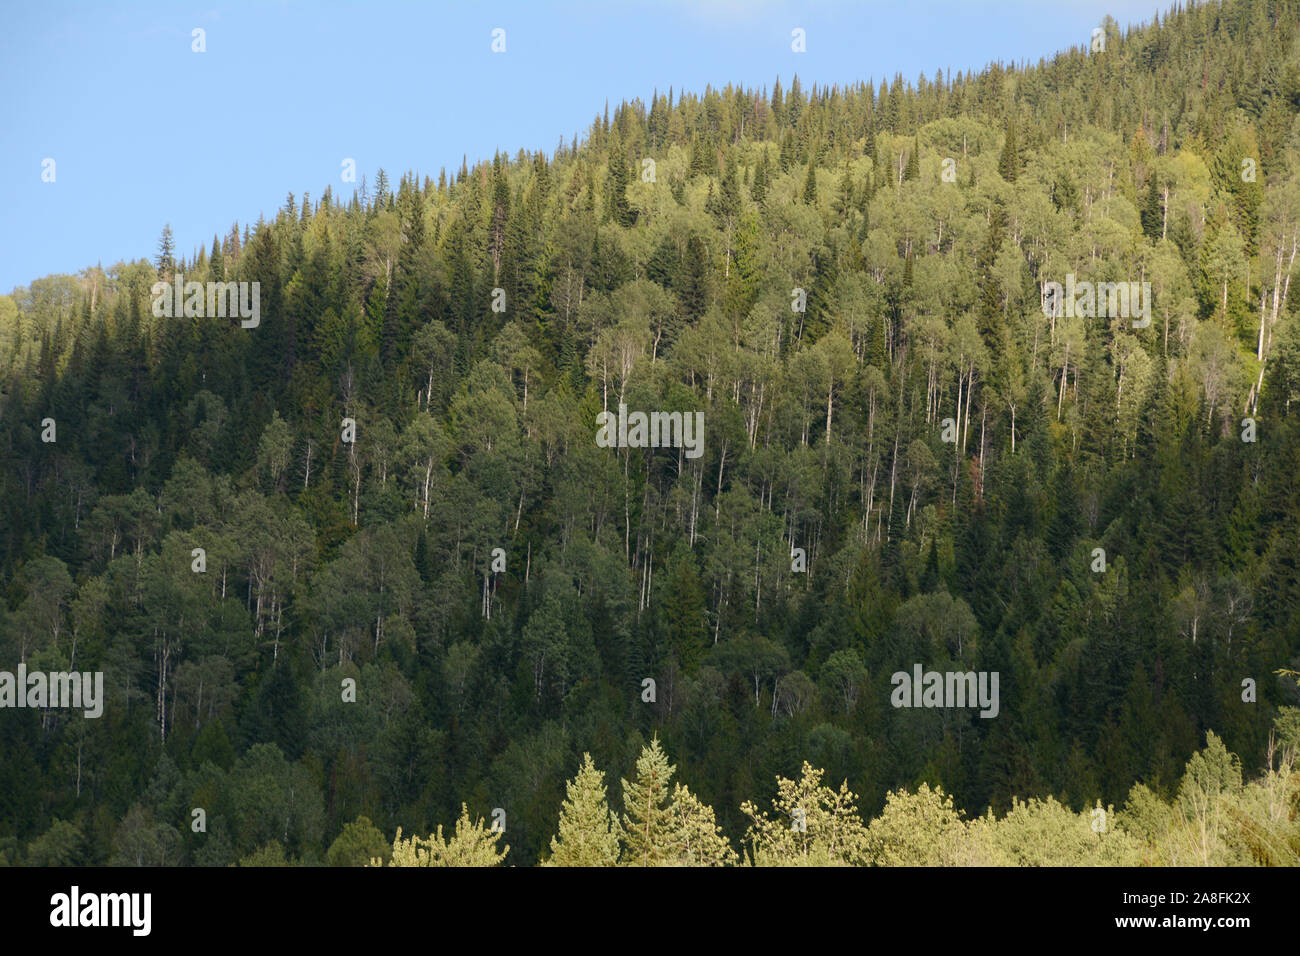 A mixed deciduous and coniferous temperate rainforest in the Selkirk Mountains in the Kootenays region of southeastern British Columbia, Canada. Stock Photo